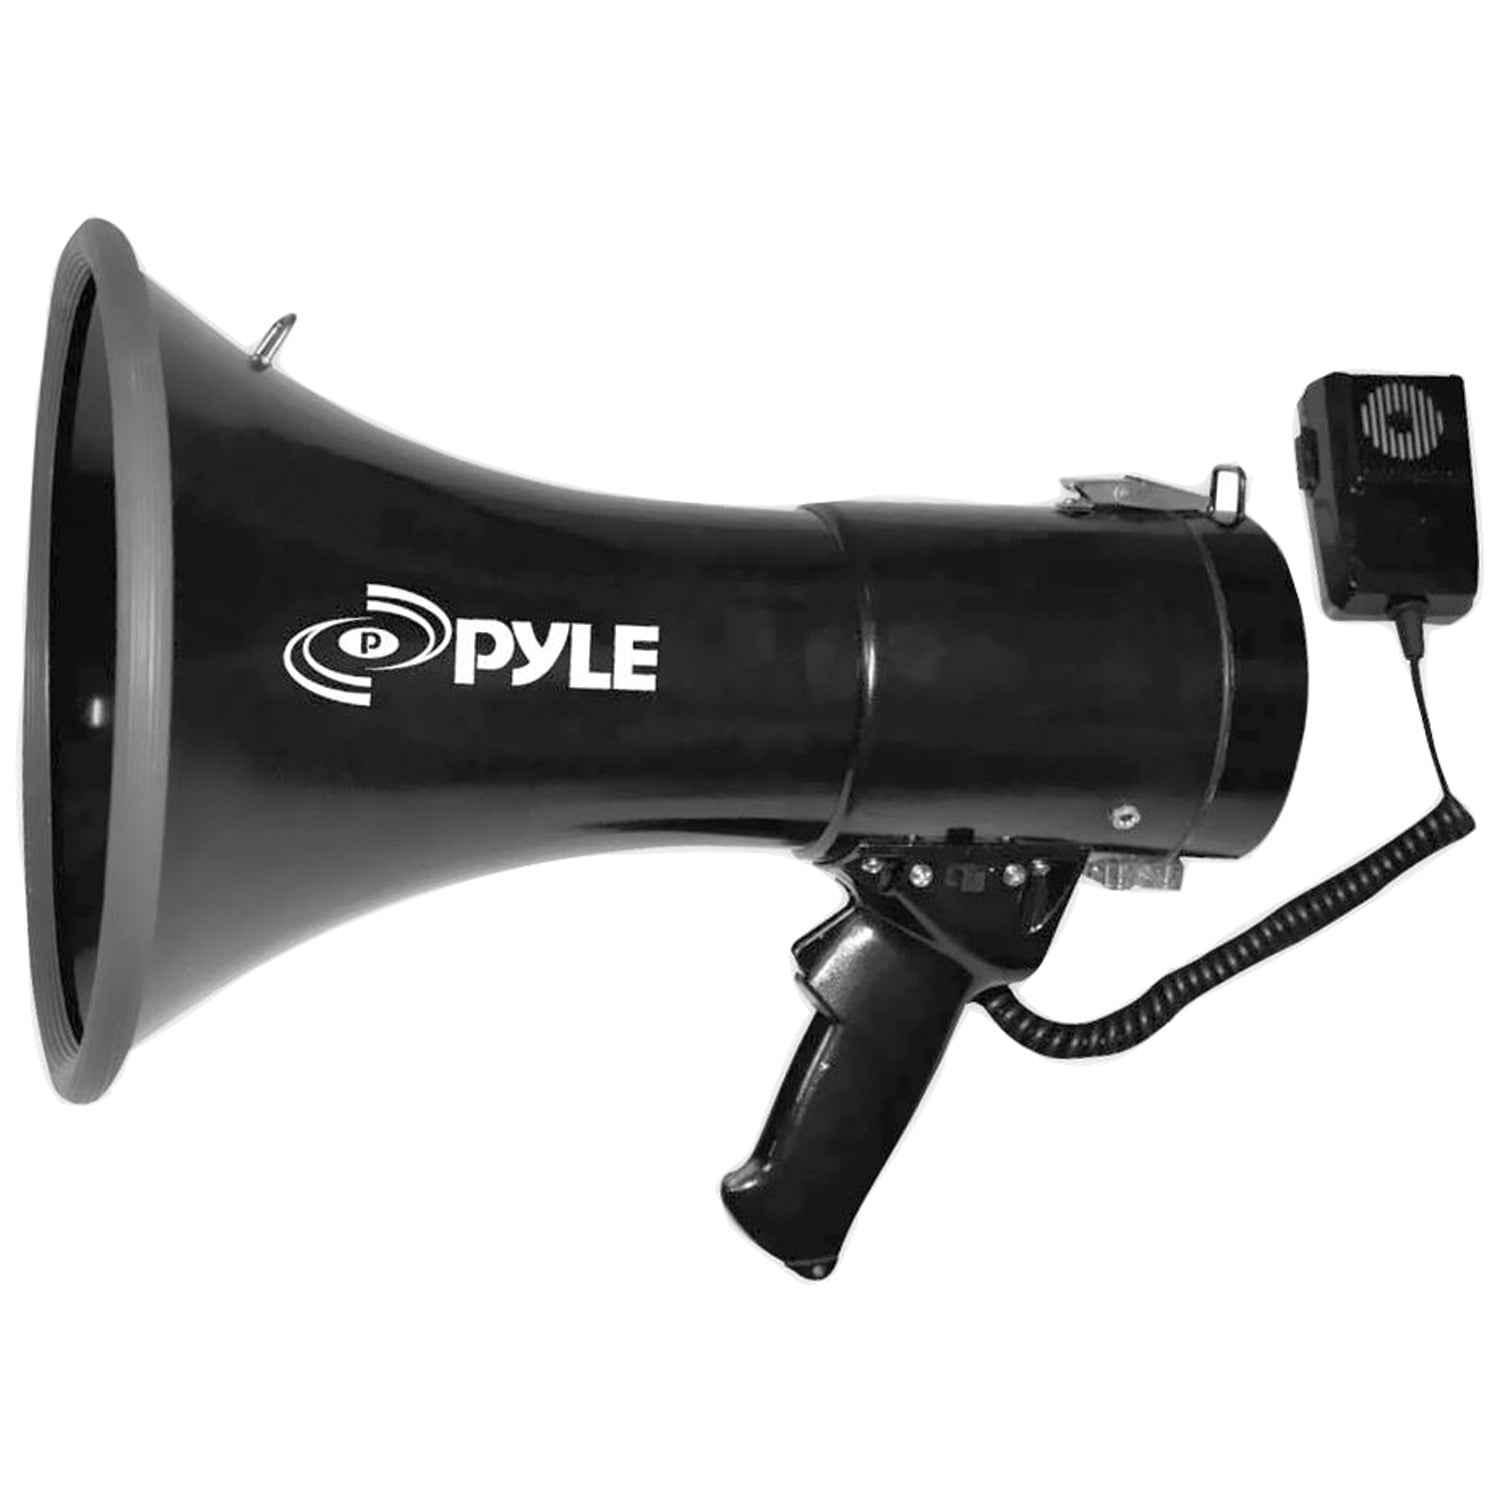 PYLE PMP40 40 Watts Professional Megaphone with Siren and Handheld Microphone 